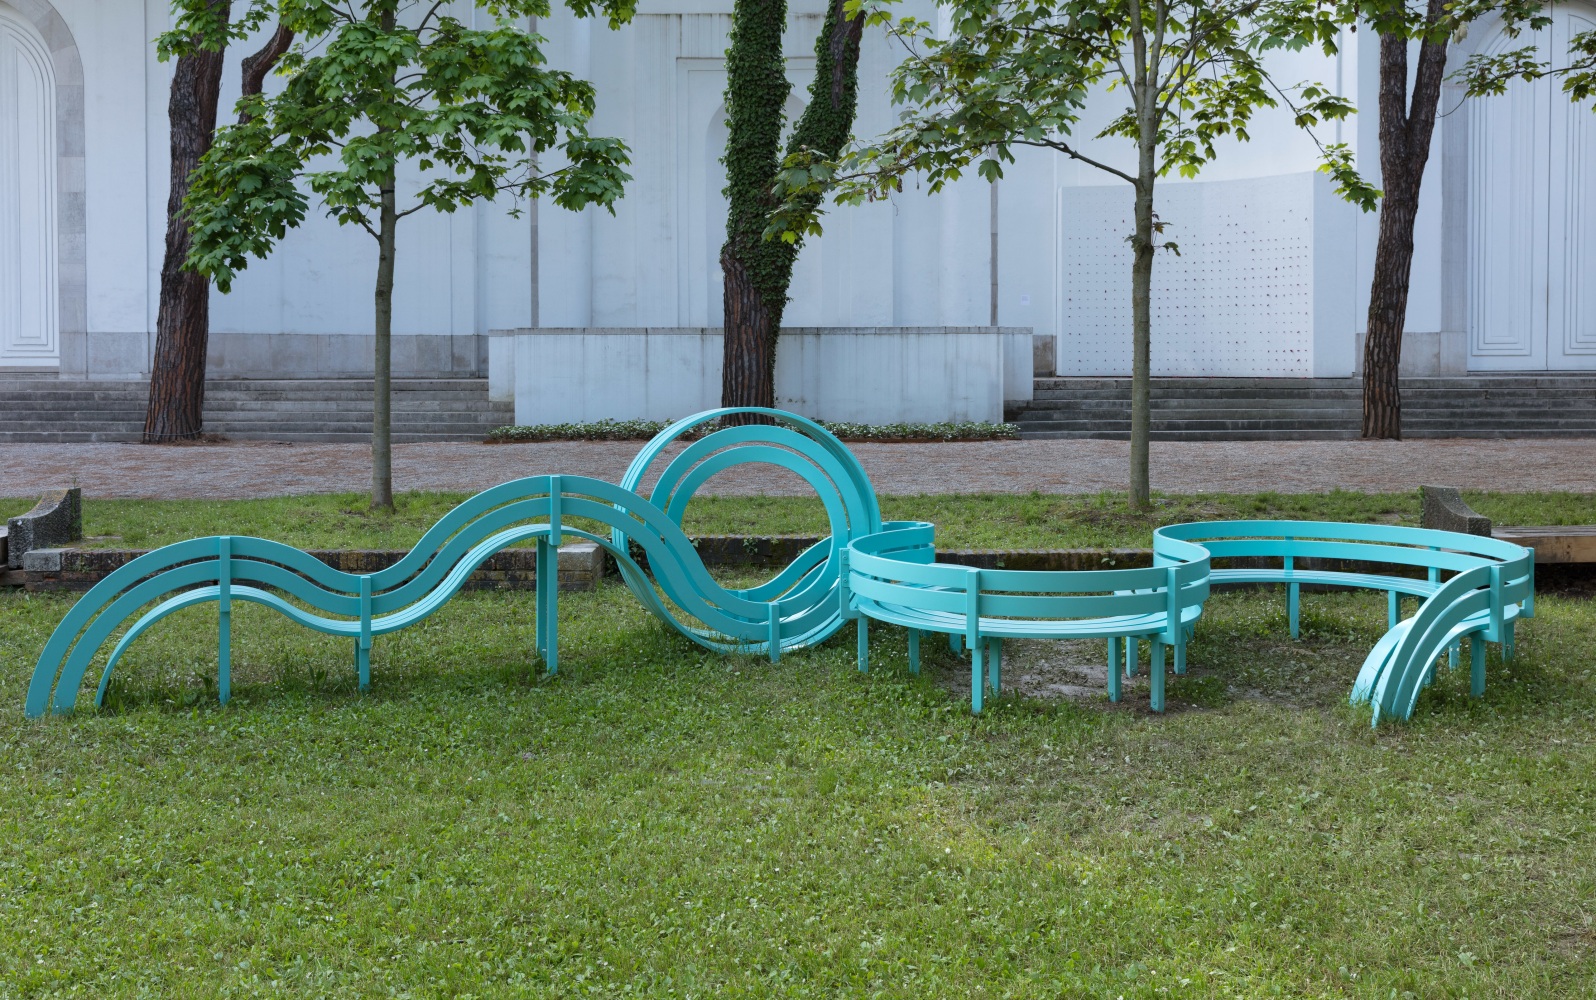 Jeppe Hein

Modified Social Bench for Venice #04

2019

Powder coated aluminum

59 1/2 x 308 5/8 x 132 5/8 inches (151 x 784 x 337 cm)

Edition&amp;nbsp;of 3, with 2 AP

JH 520